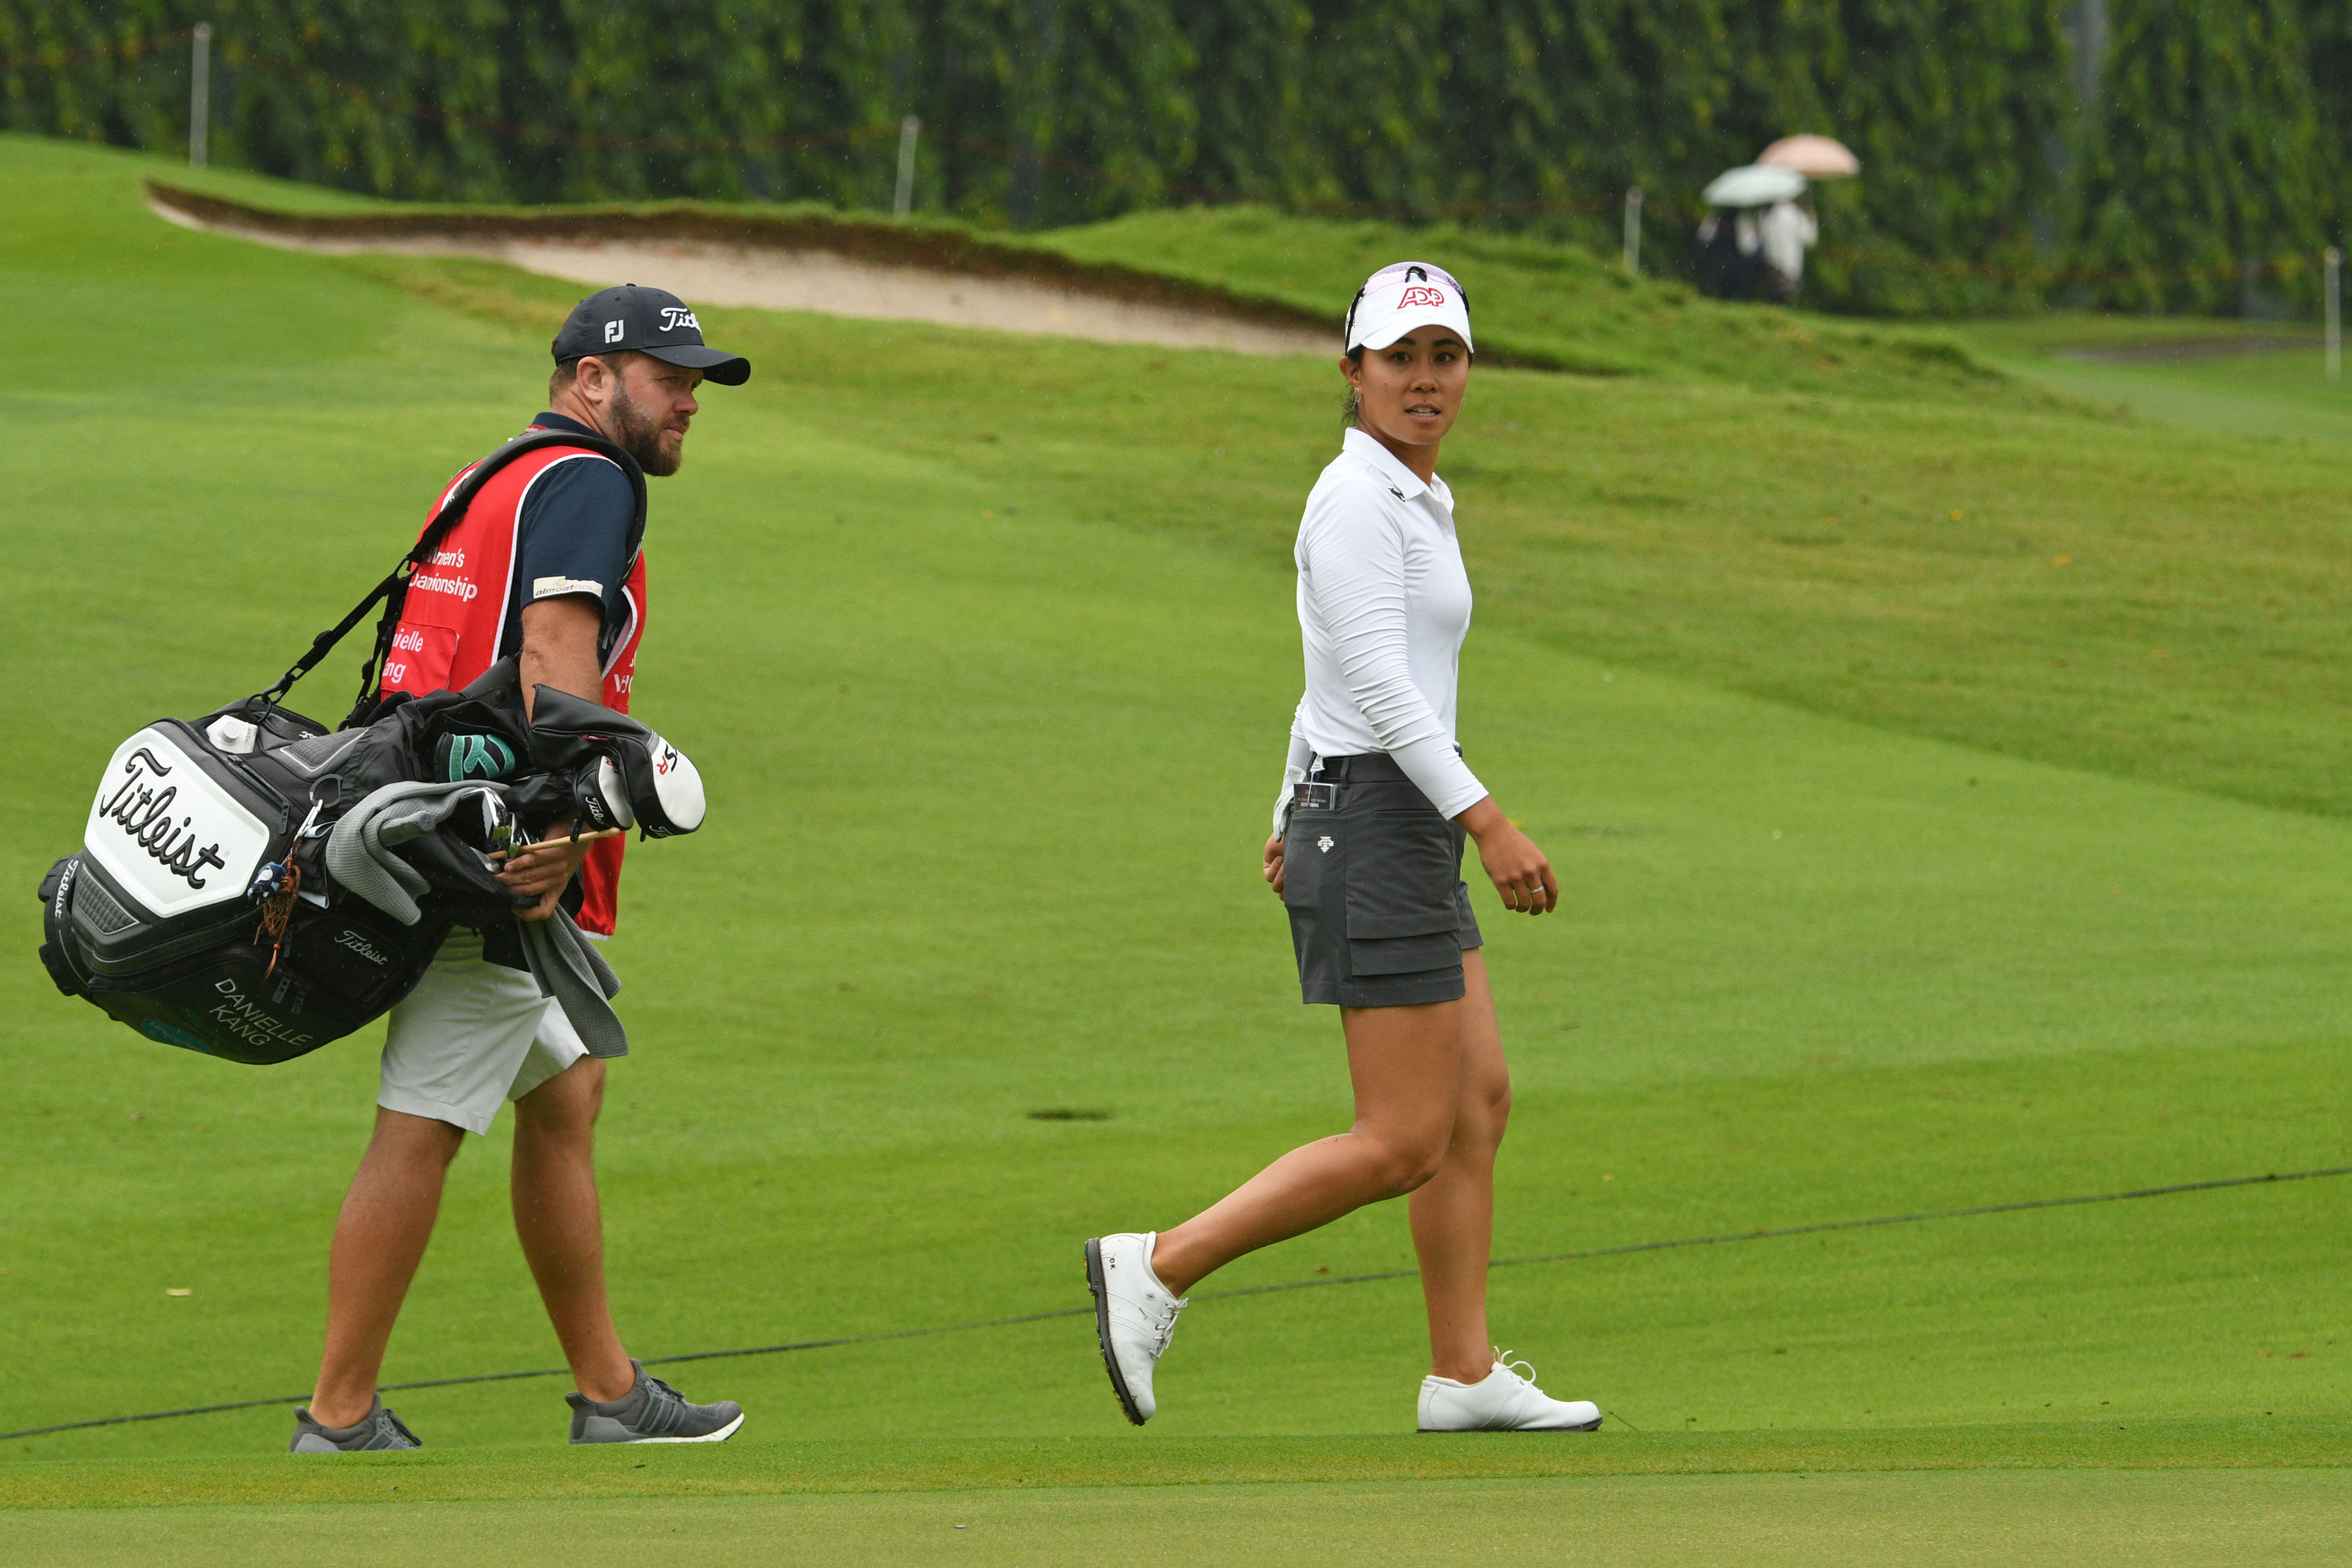 Danielle Kang walks down a fairway during the second round of the HSBC Women’s World Championship. Photo: Xinhua